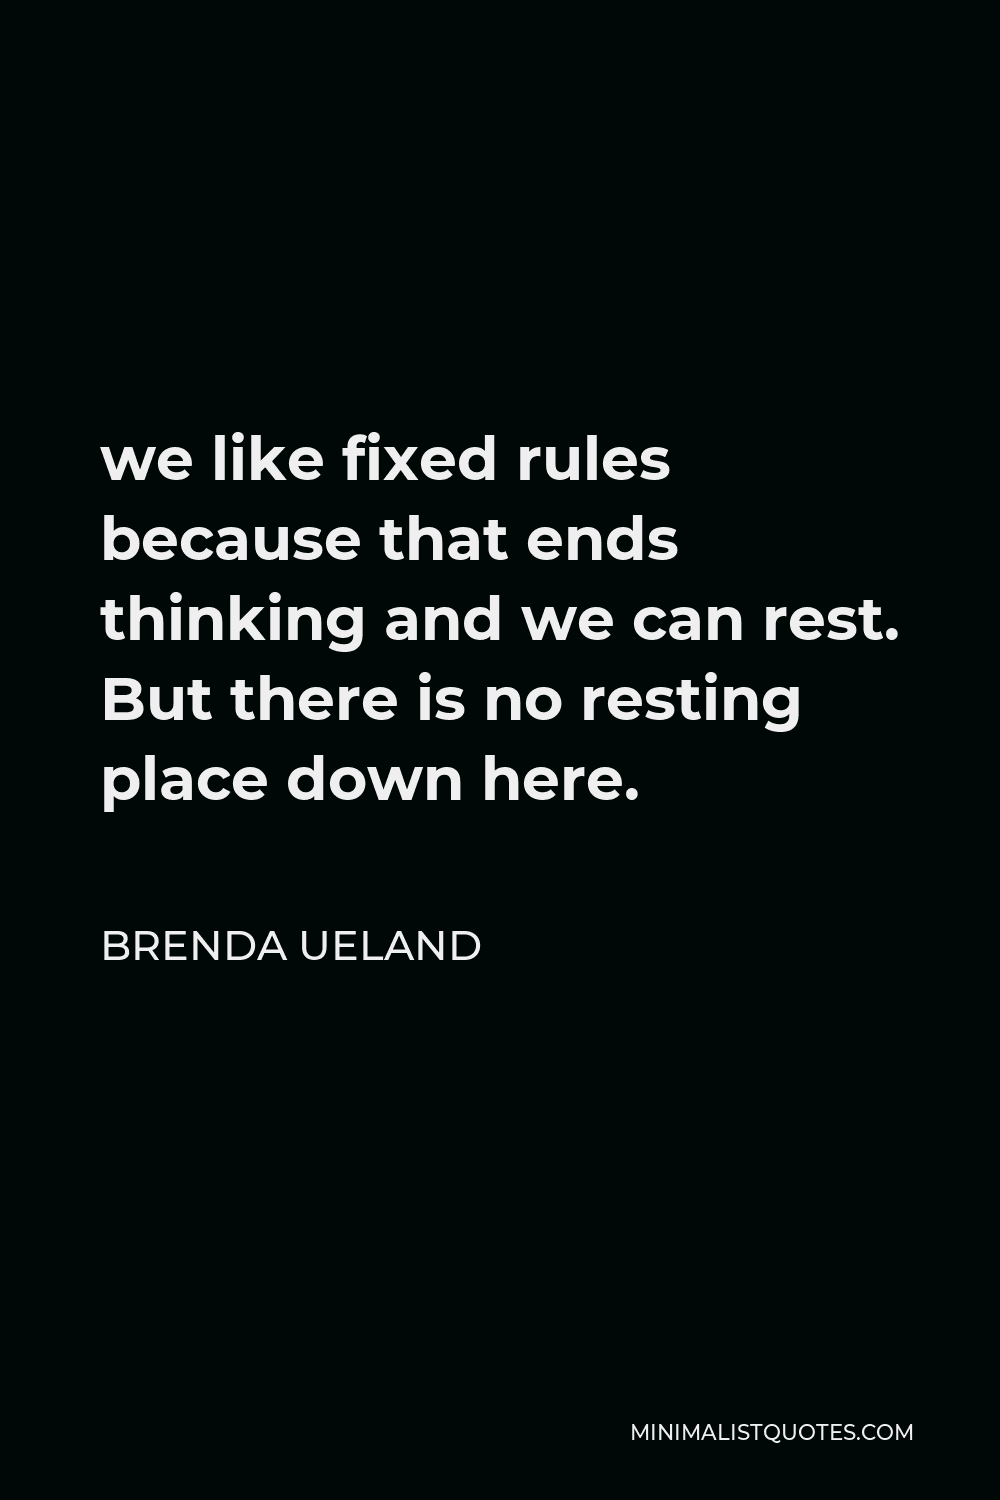 Brenda Ueland Quote - we like fixed rules because that ends thinking and we can rest. But there is no resting place down here.